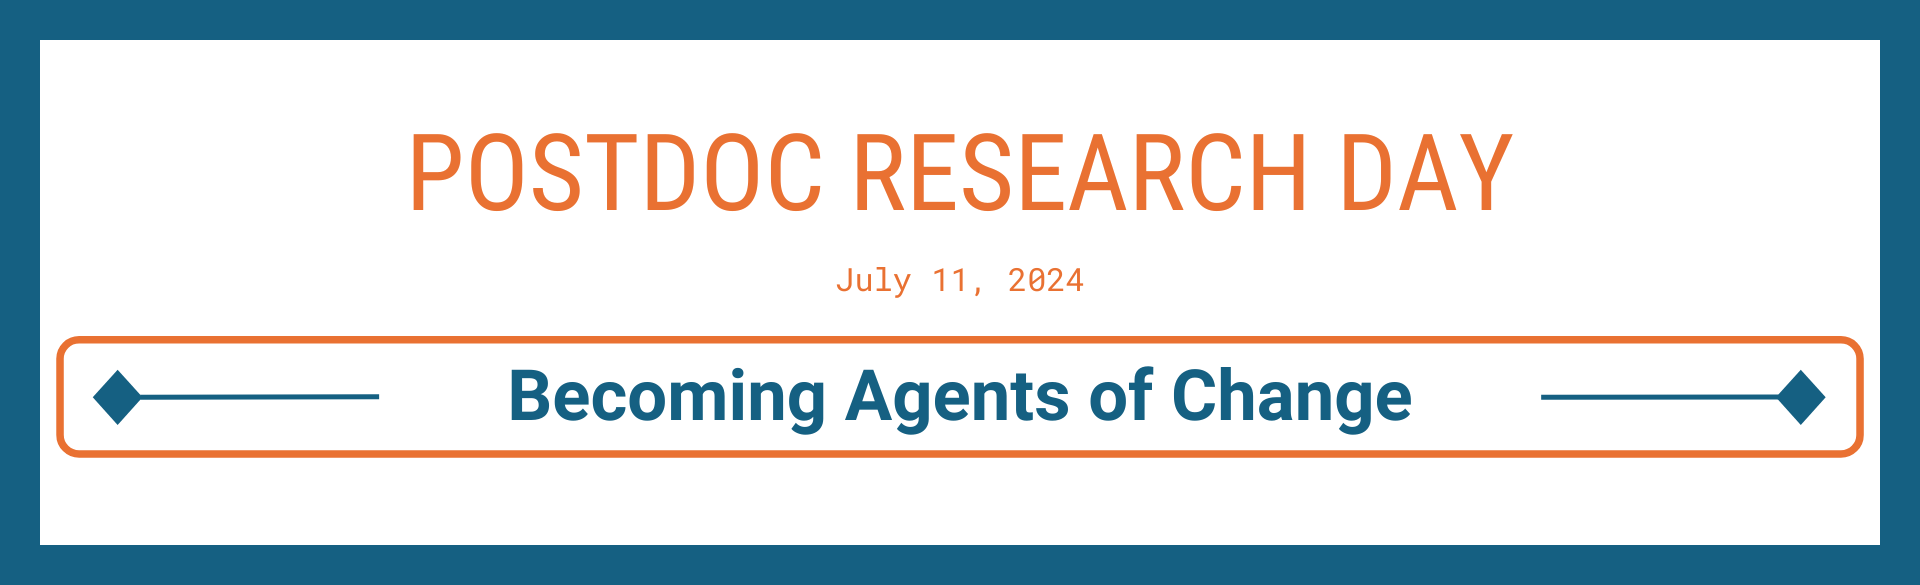 Postdoc Research Day July 11, 2024 Becoming Agents of Change